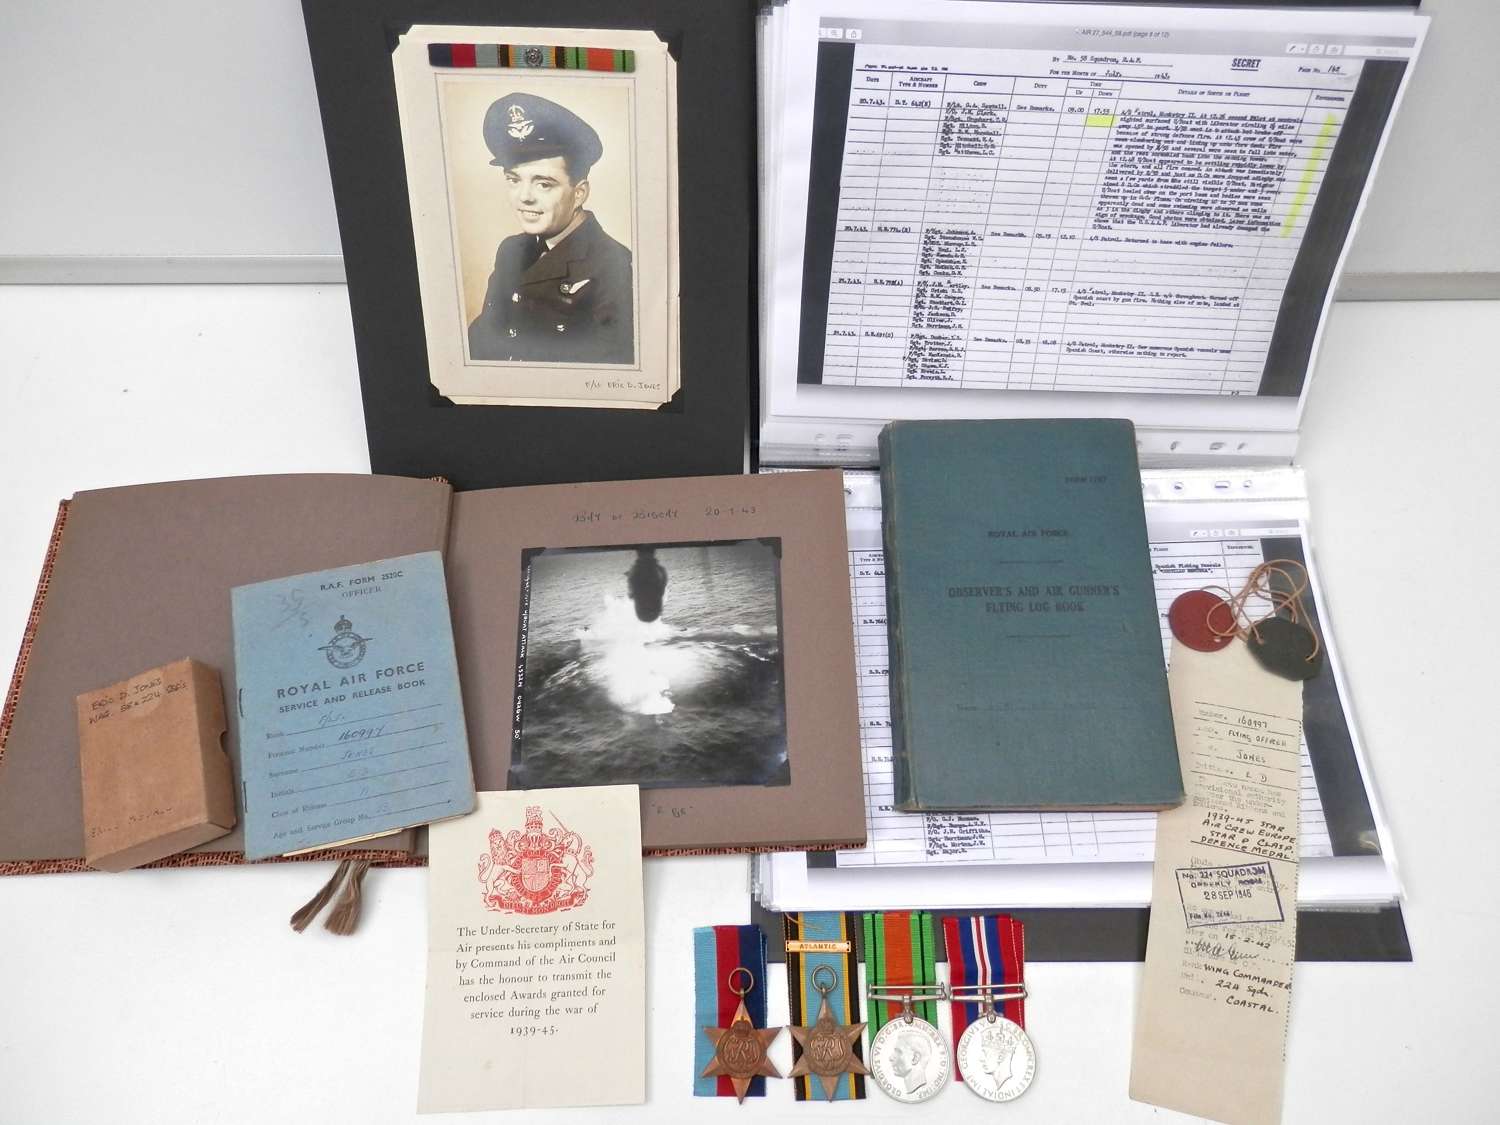 RAF log book, medals and photo album to Wireless / air gunner